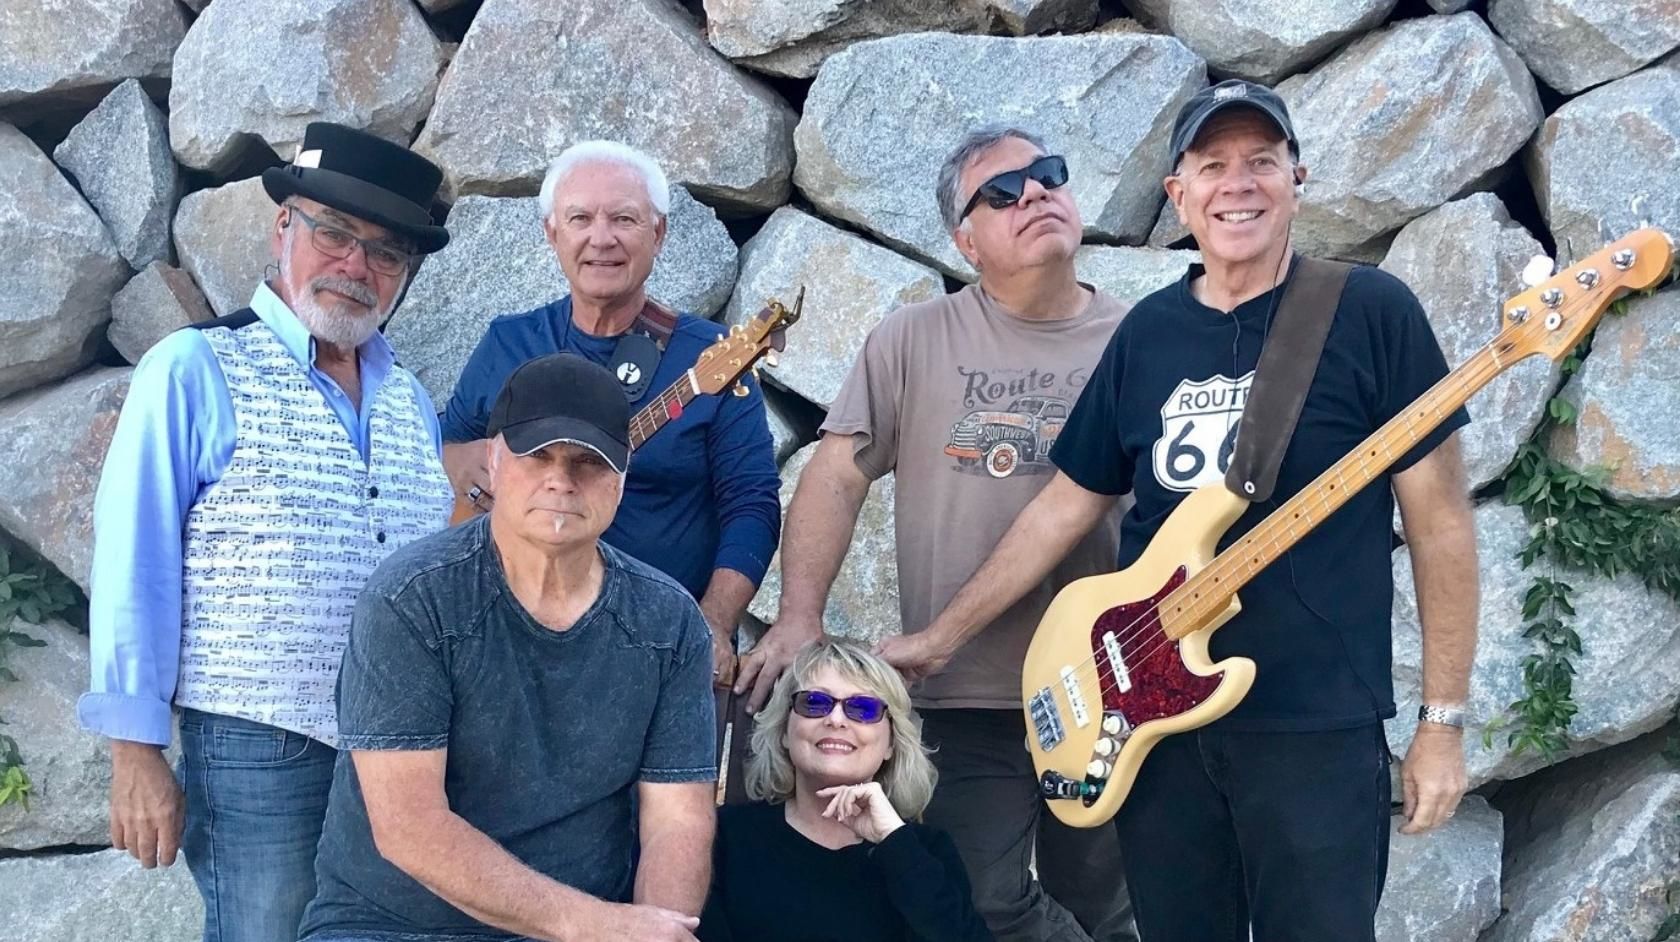 A Group Of People Standing Next To A Guitar